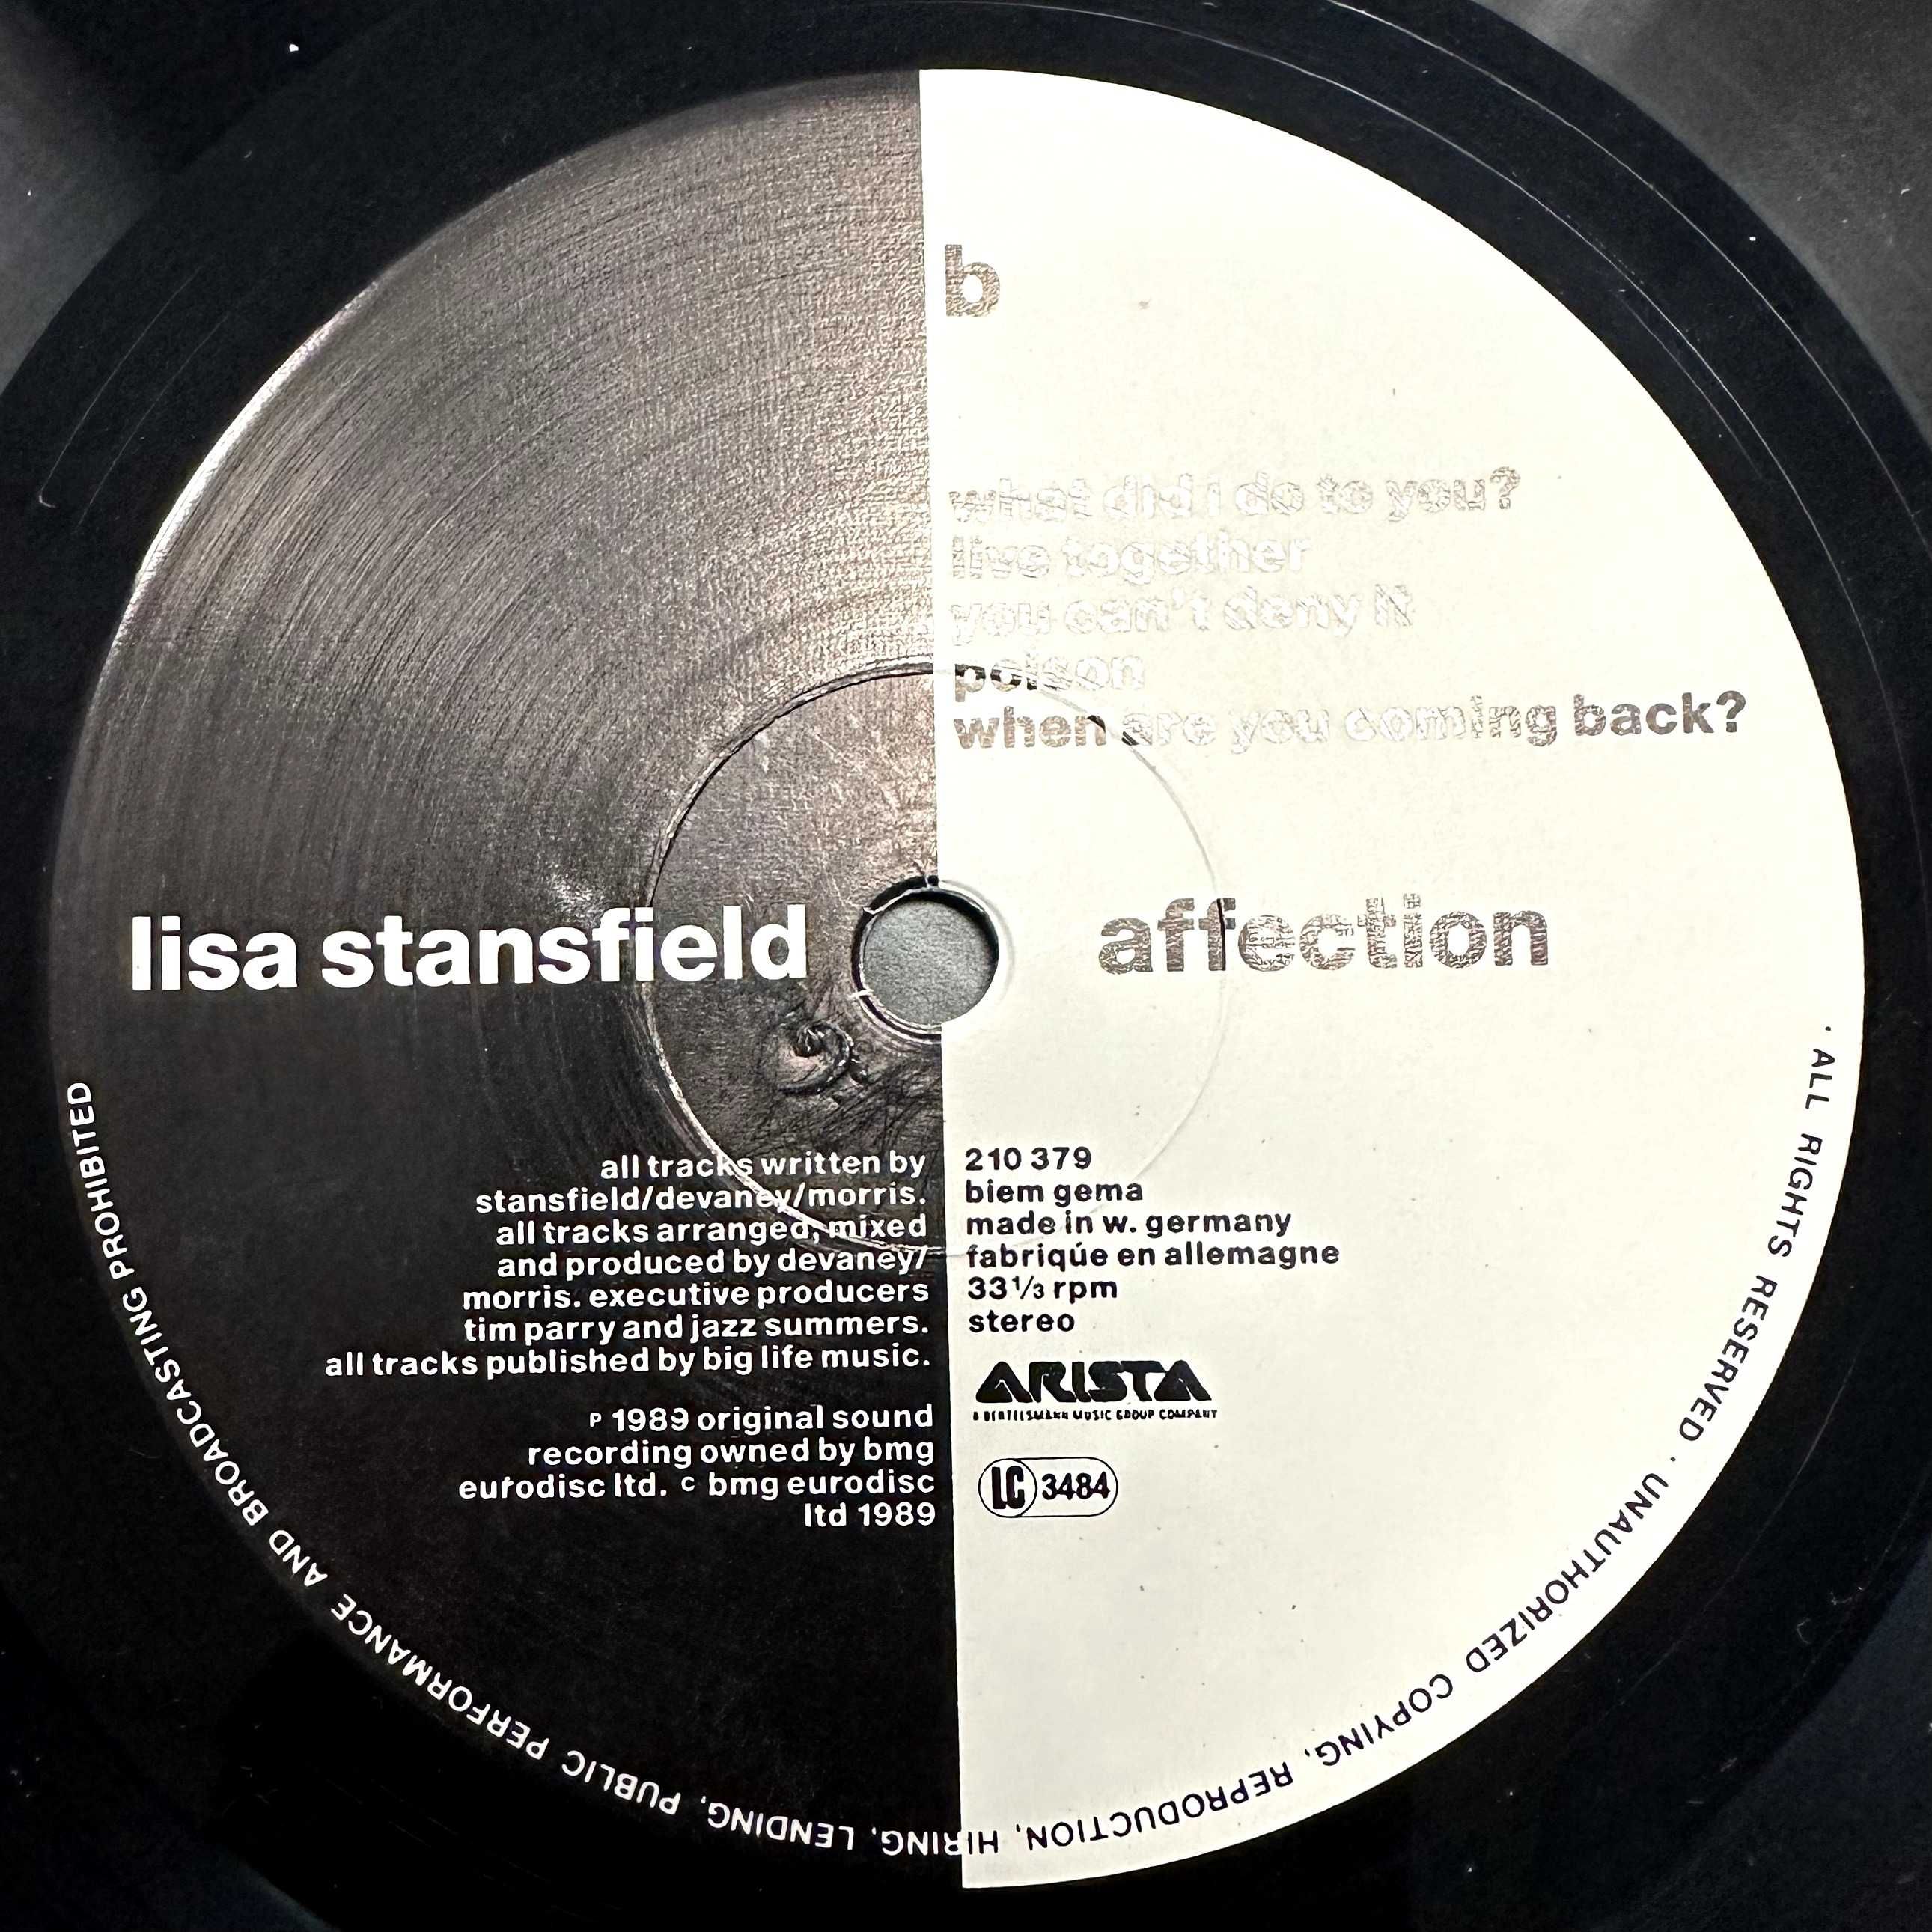 Lisa Stansfield - Affection (Vinyl, 1989, Europe)